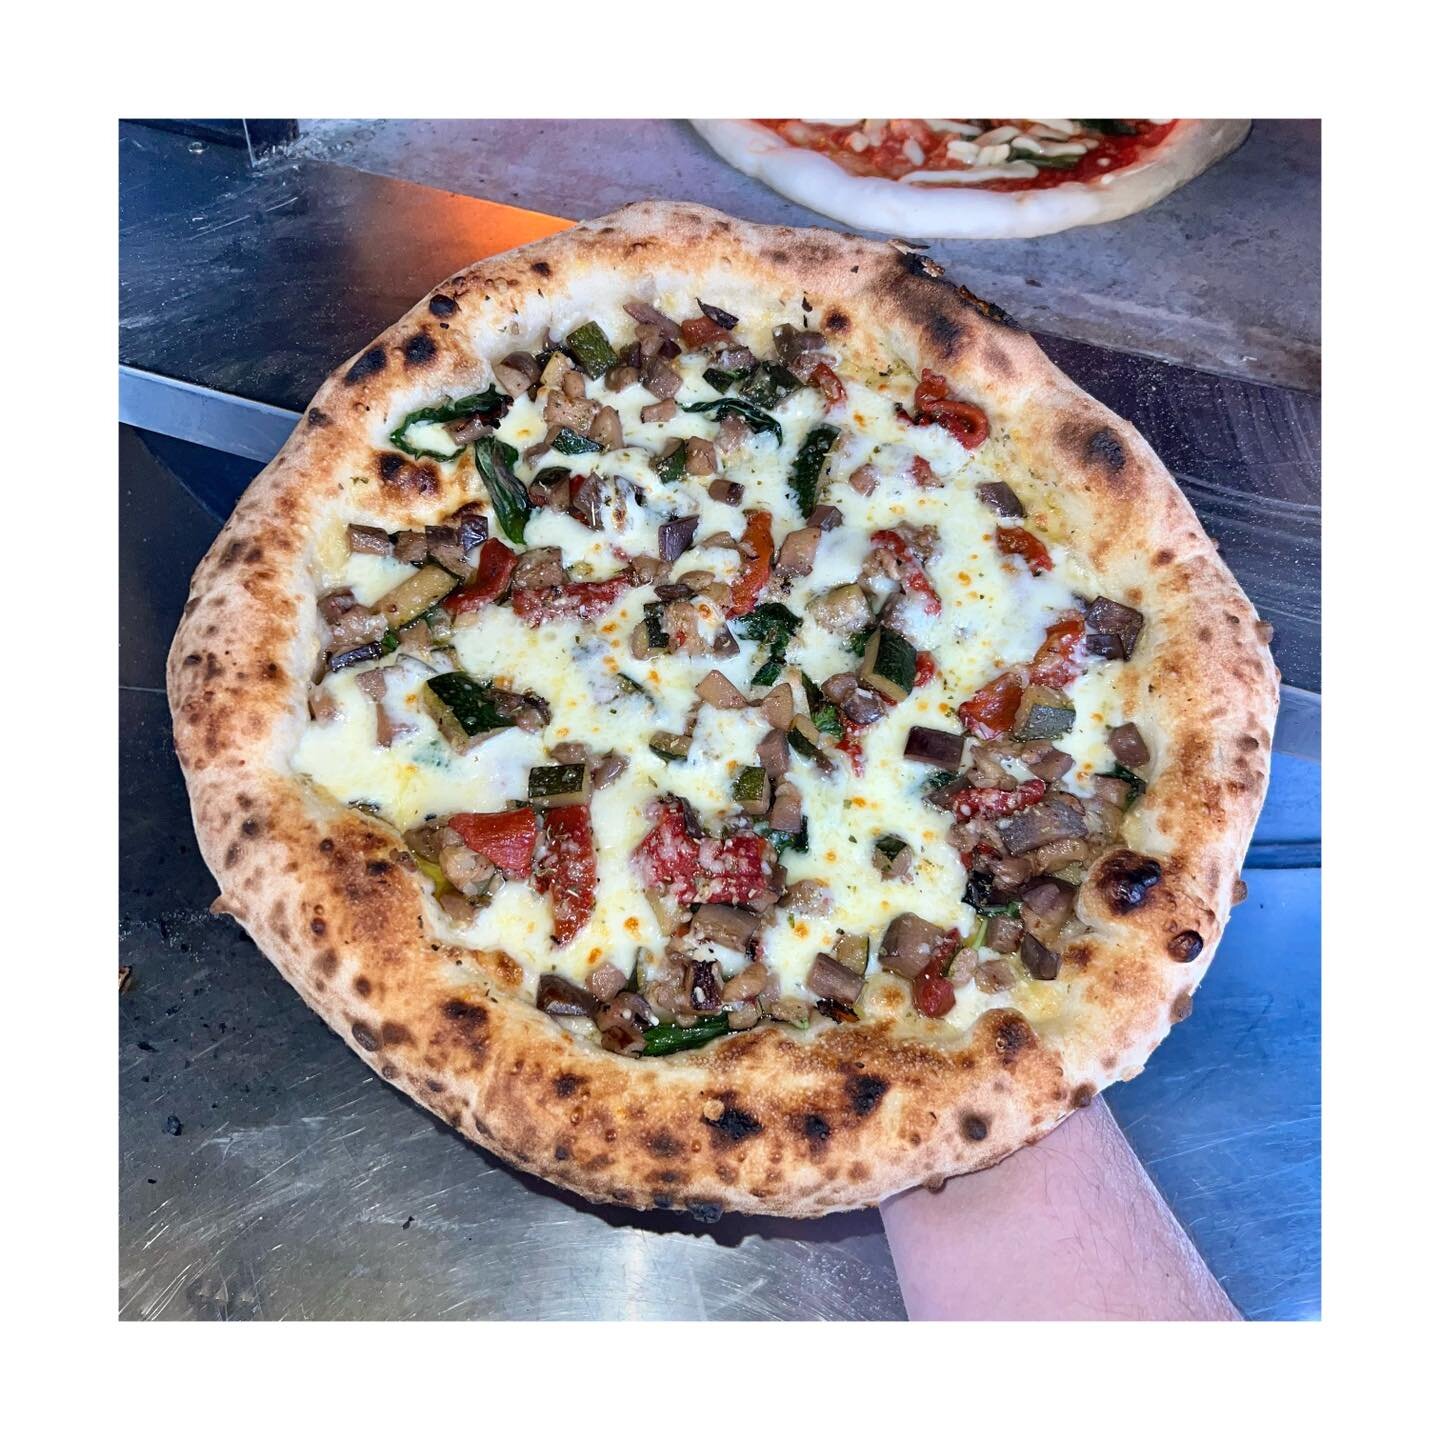 This month's special 🔥

- Parmigiano Reggiano
- Basil
- A mix of aubergine, courgette, and peppers
- Provolone cheese
- Fior di latte
- Wild Calabrian oregano
- A healthy drizzle of EVOO

Can't decide which pizza to try this month? Come give our spe